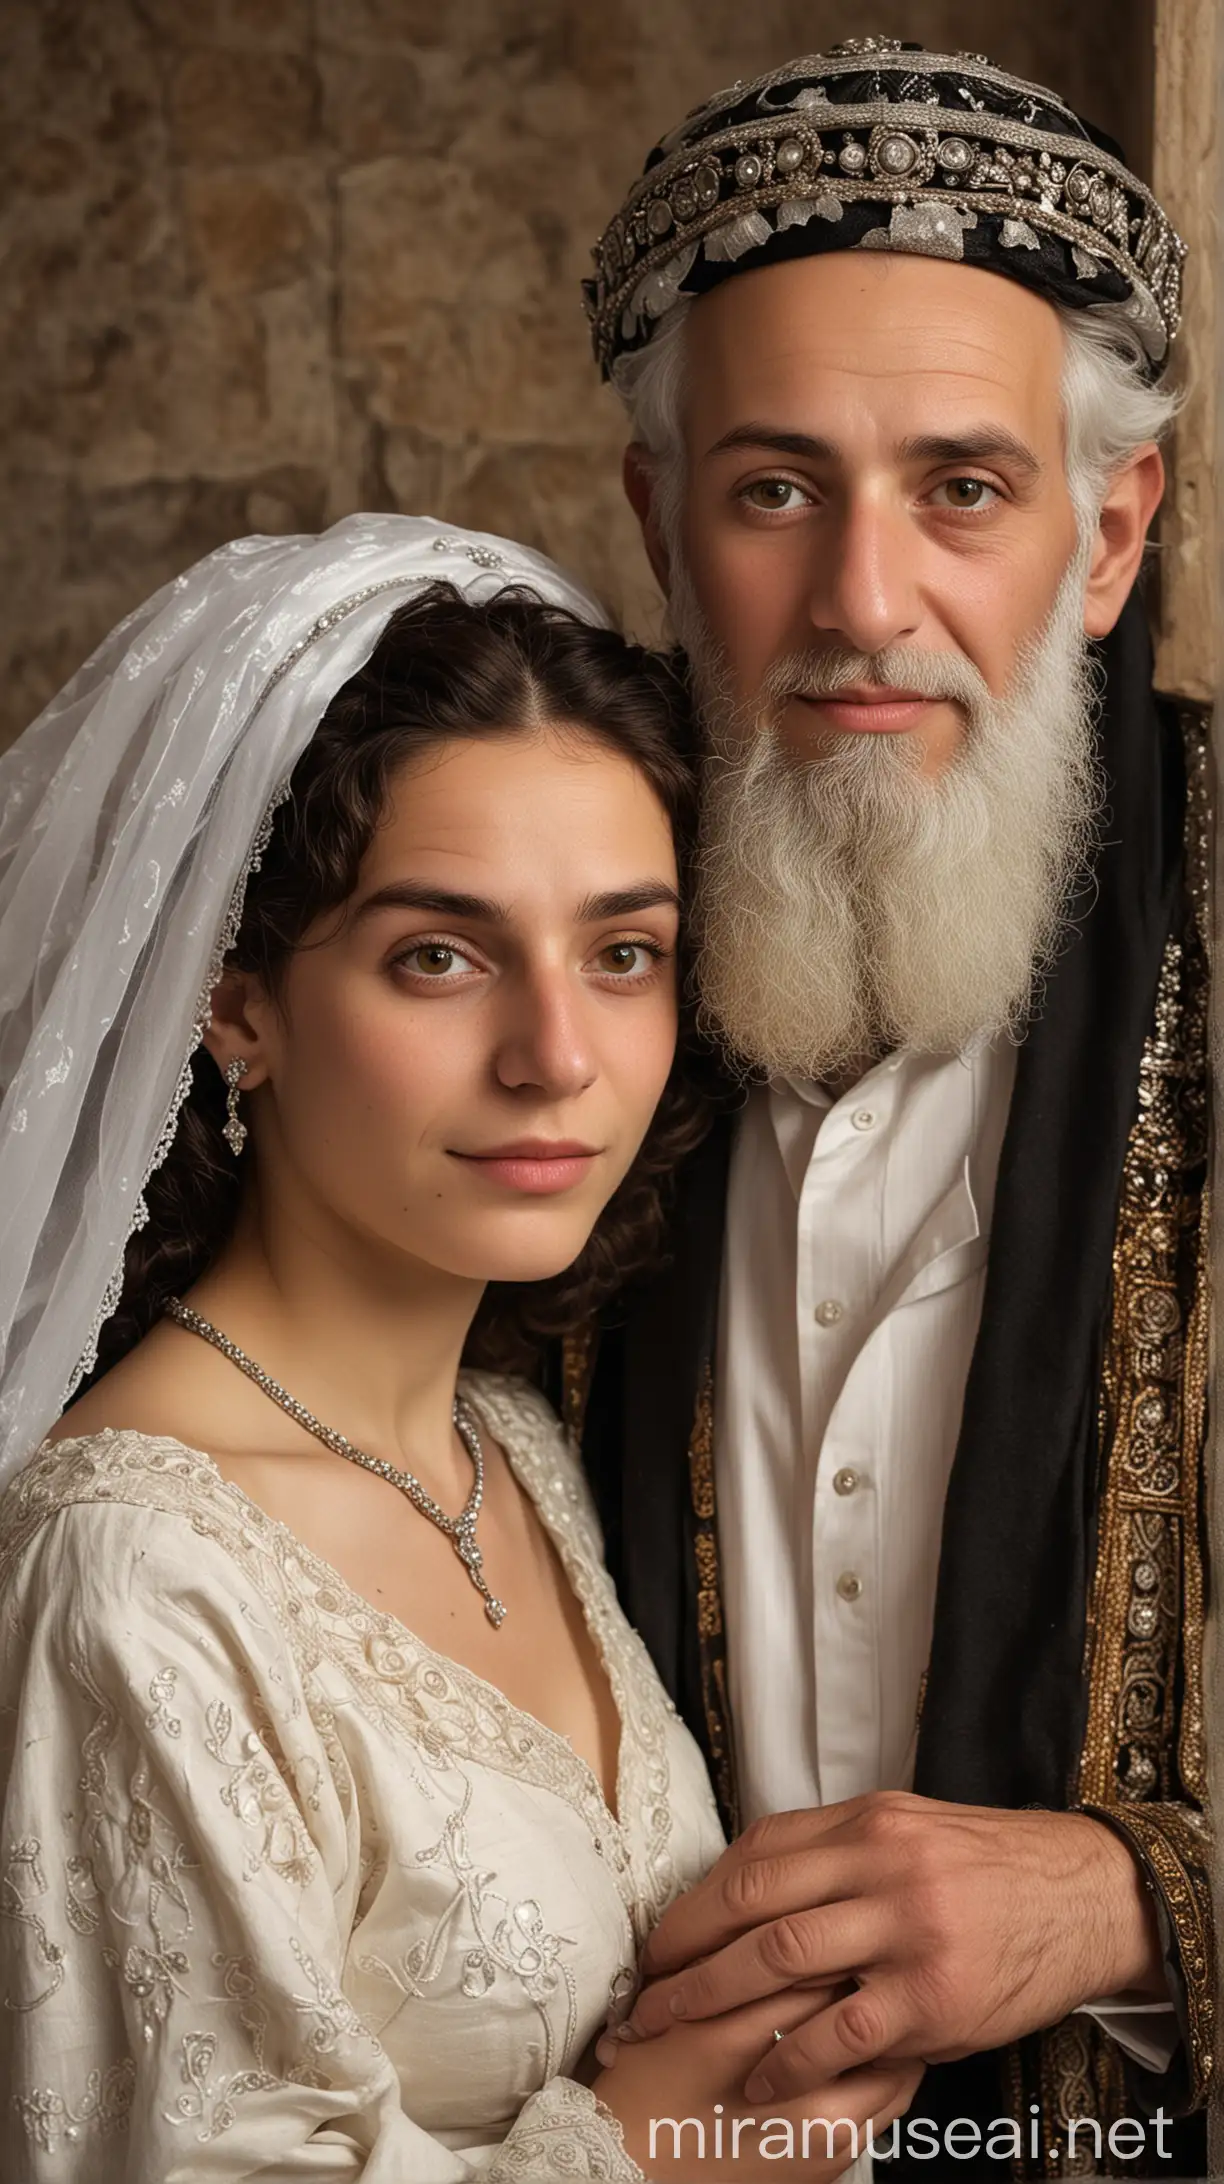 Marriage of a Young Jewish Woman and an Elderly Jewish Man in Ancient Times